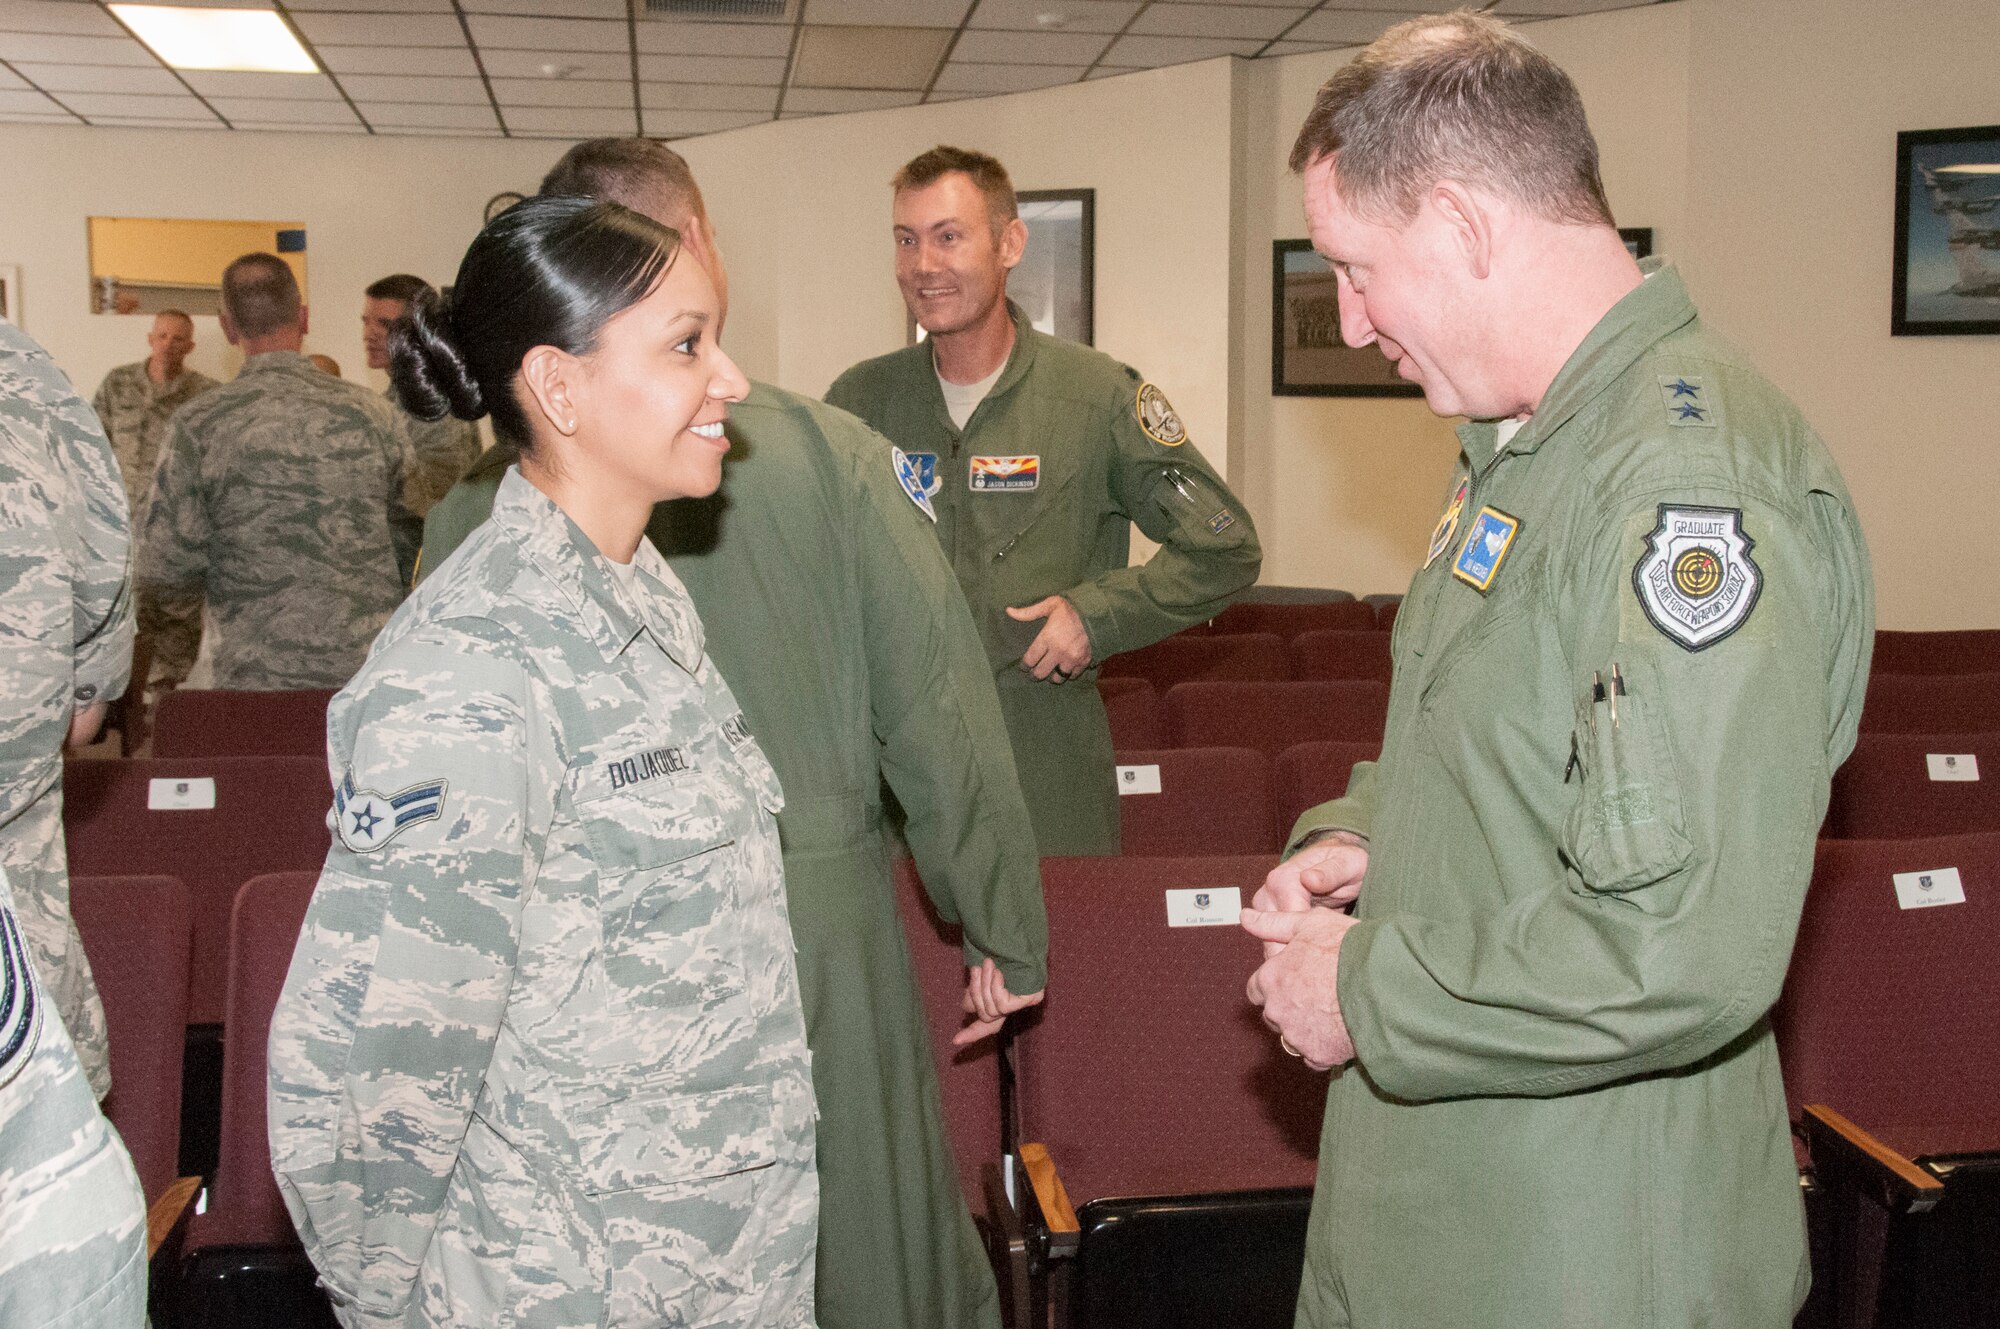 Maj. Gen. James Hecker, 19th Air Force commander, speaks with Airman 1st Class Irlanda Dojaquez from the Arizona Air National Guard’s 162nd Wing during his visit March 30-April 1 to the Tucson International Airport.  The general met with members of the 162nd Wing, whose mission is to train fighter pilots from around the world.  (U.S. Air National Guard photo by 2nd Lt. Lacey Roberts/Released)